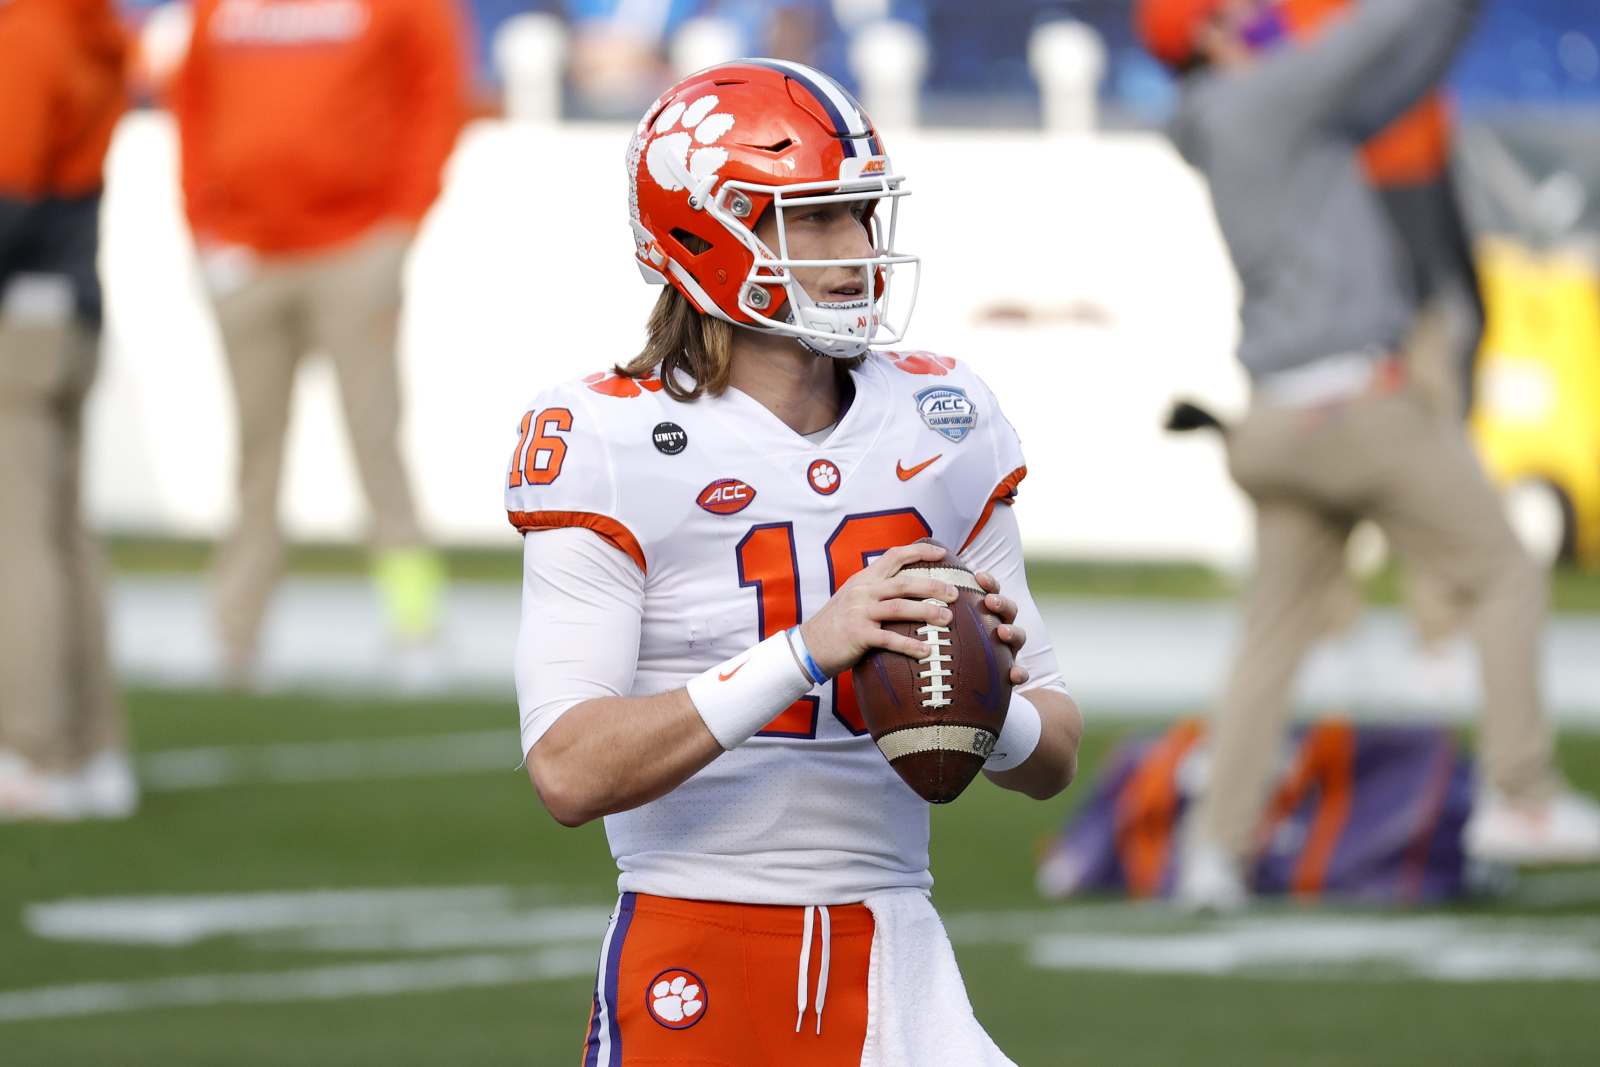 Trevor Lawrence and the Clemson Tigers look to beat Ohio State in the CFP semifinals again. However, they just received horrible news.